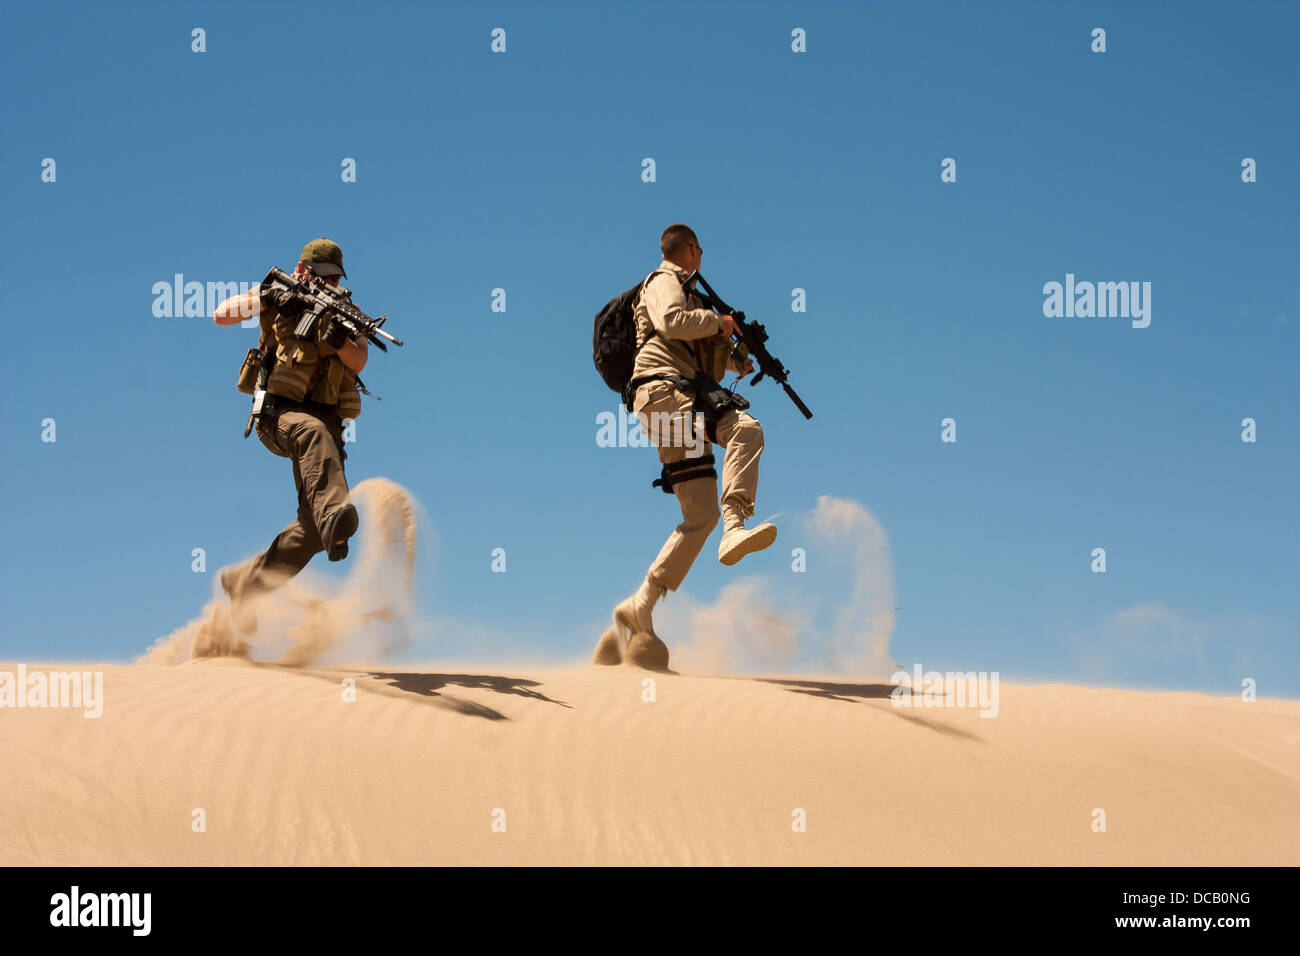 The Special Operations agents in action, jump and cover in the desert sands. Stock Photo